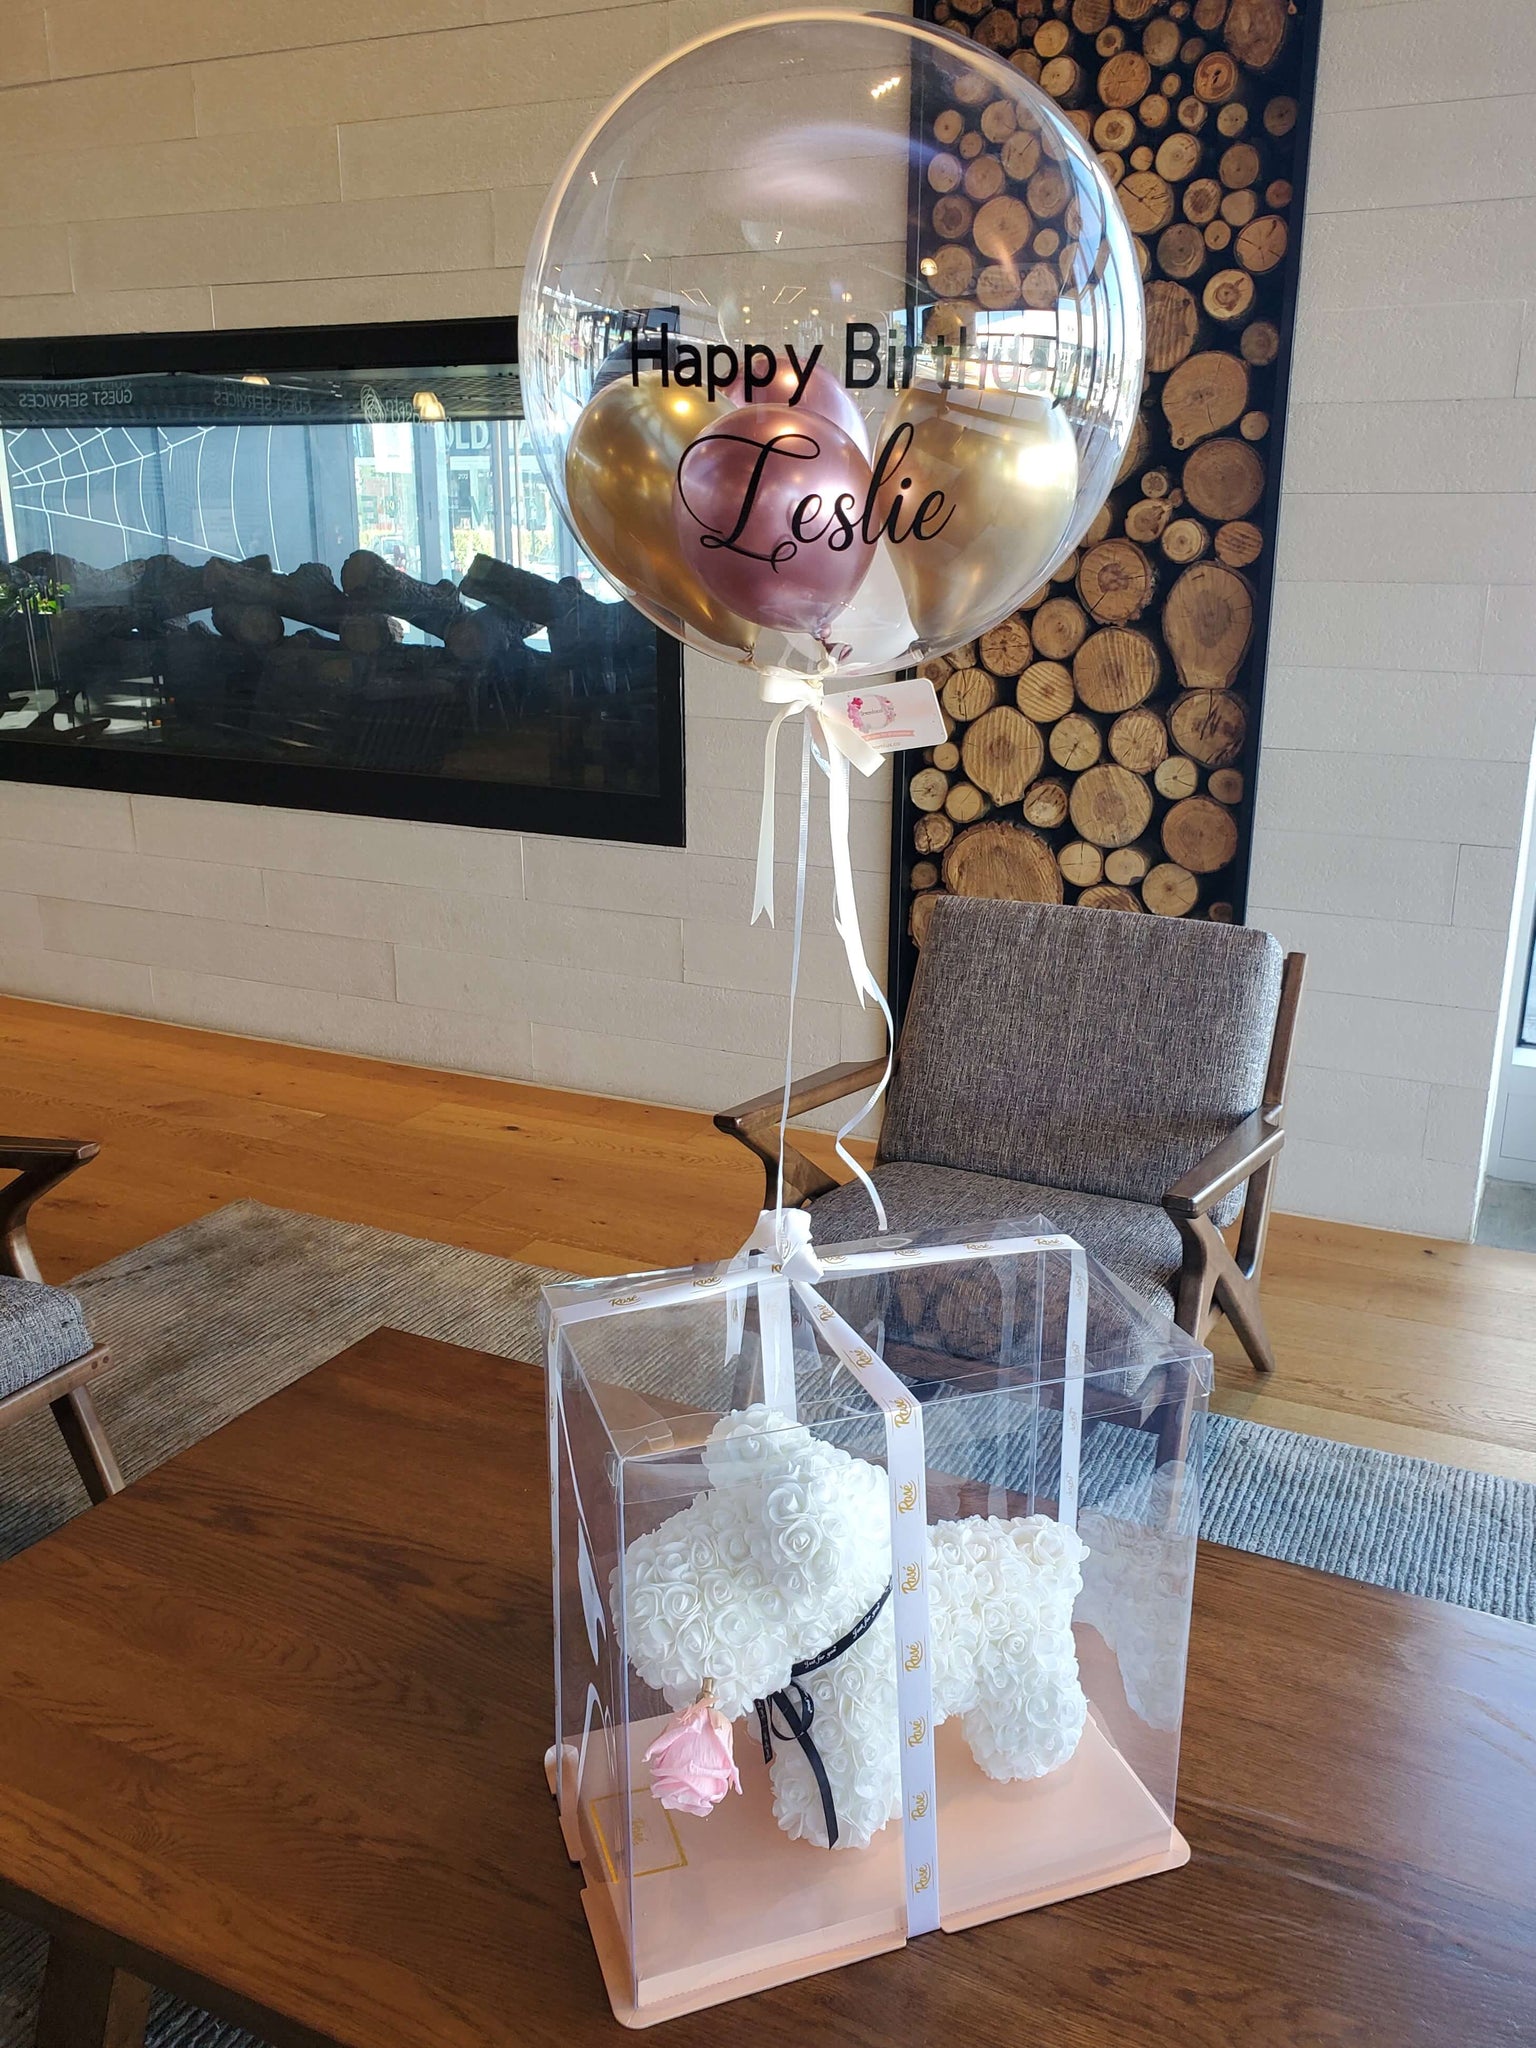 Rose Dog gift with Helium Balloon package